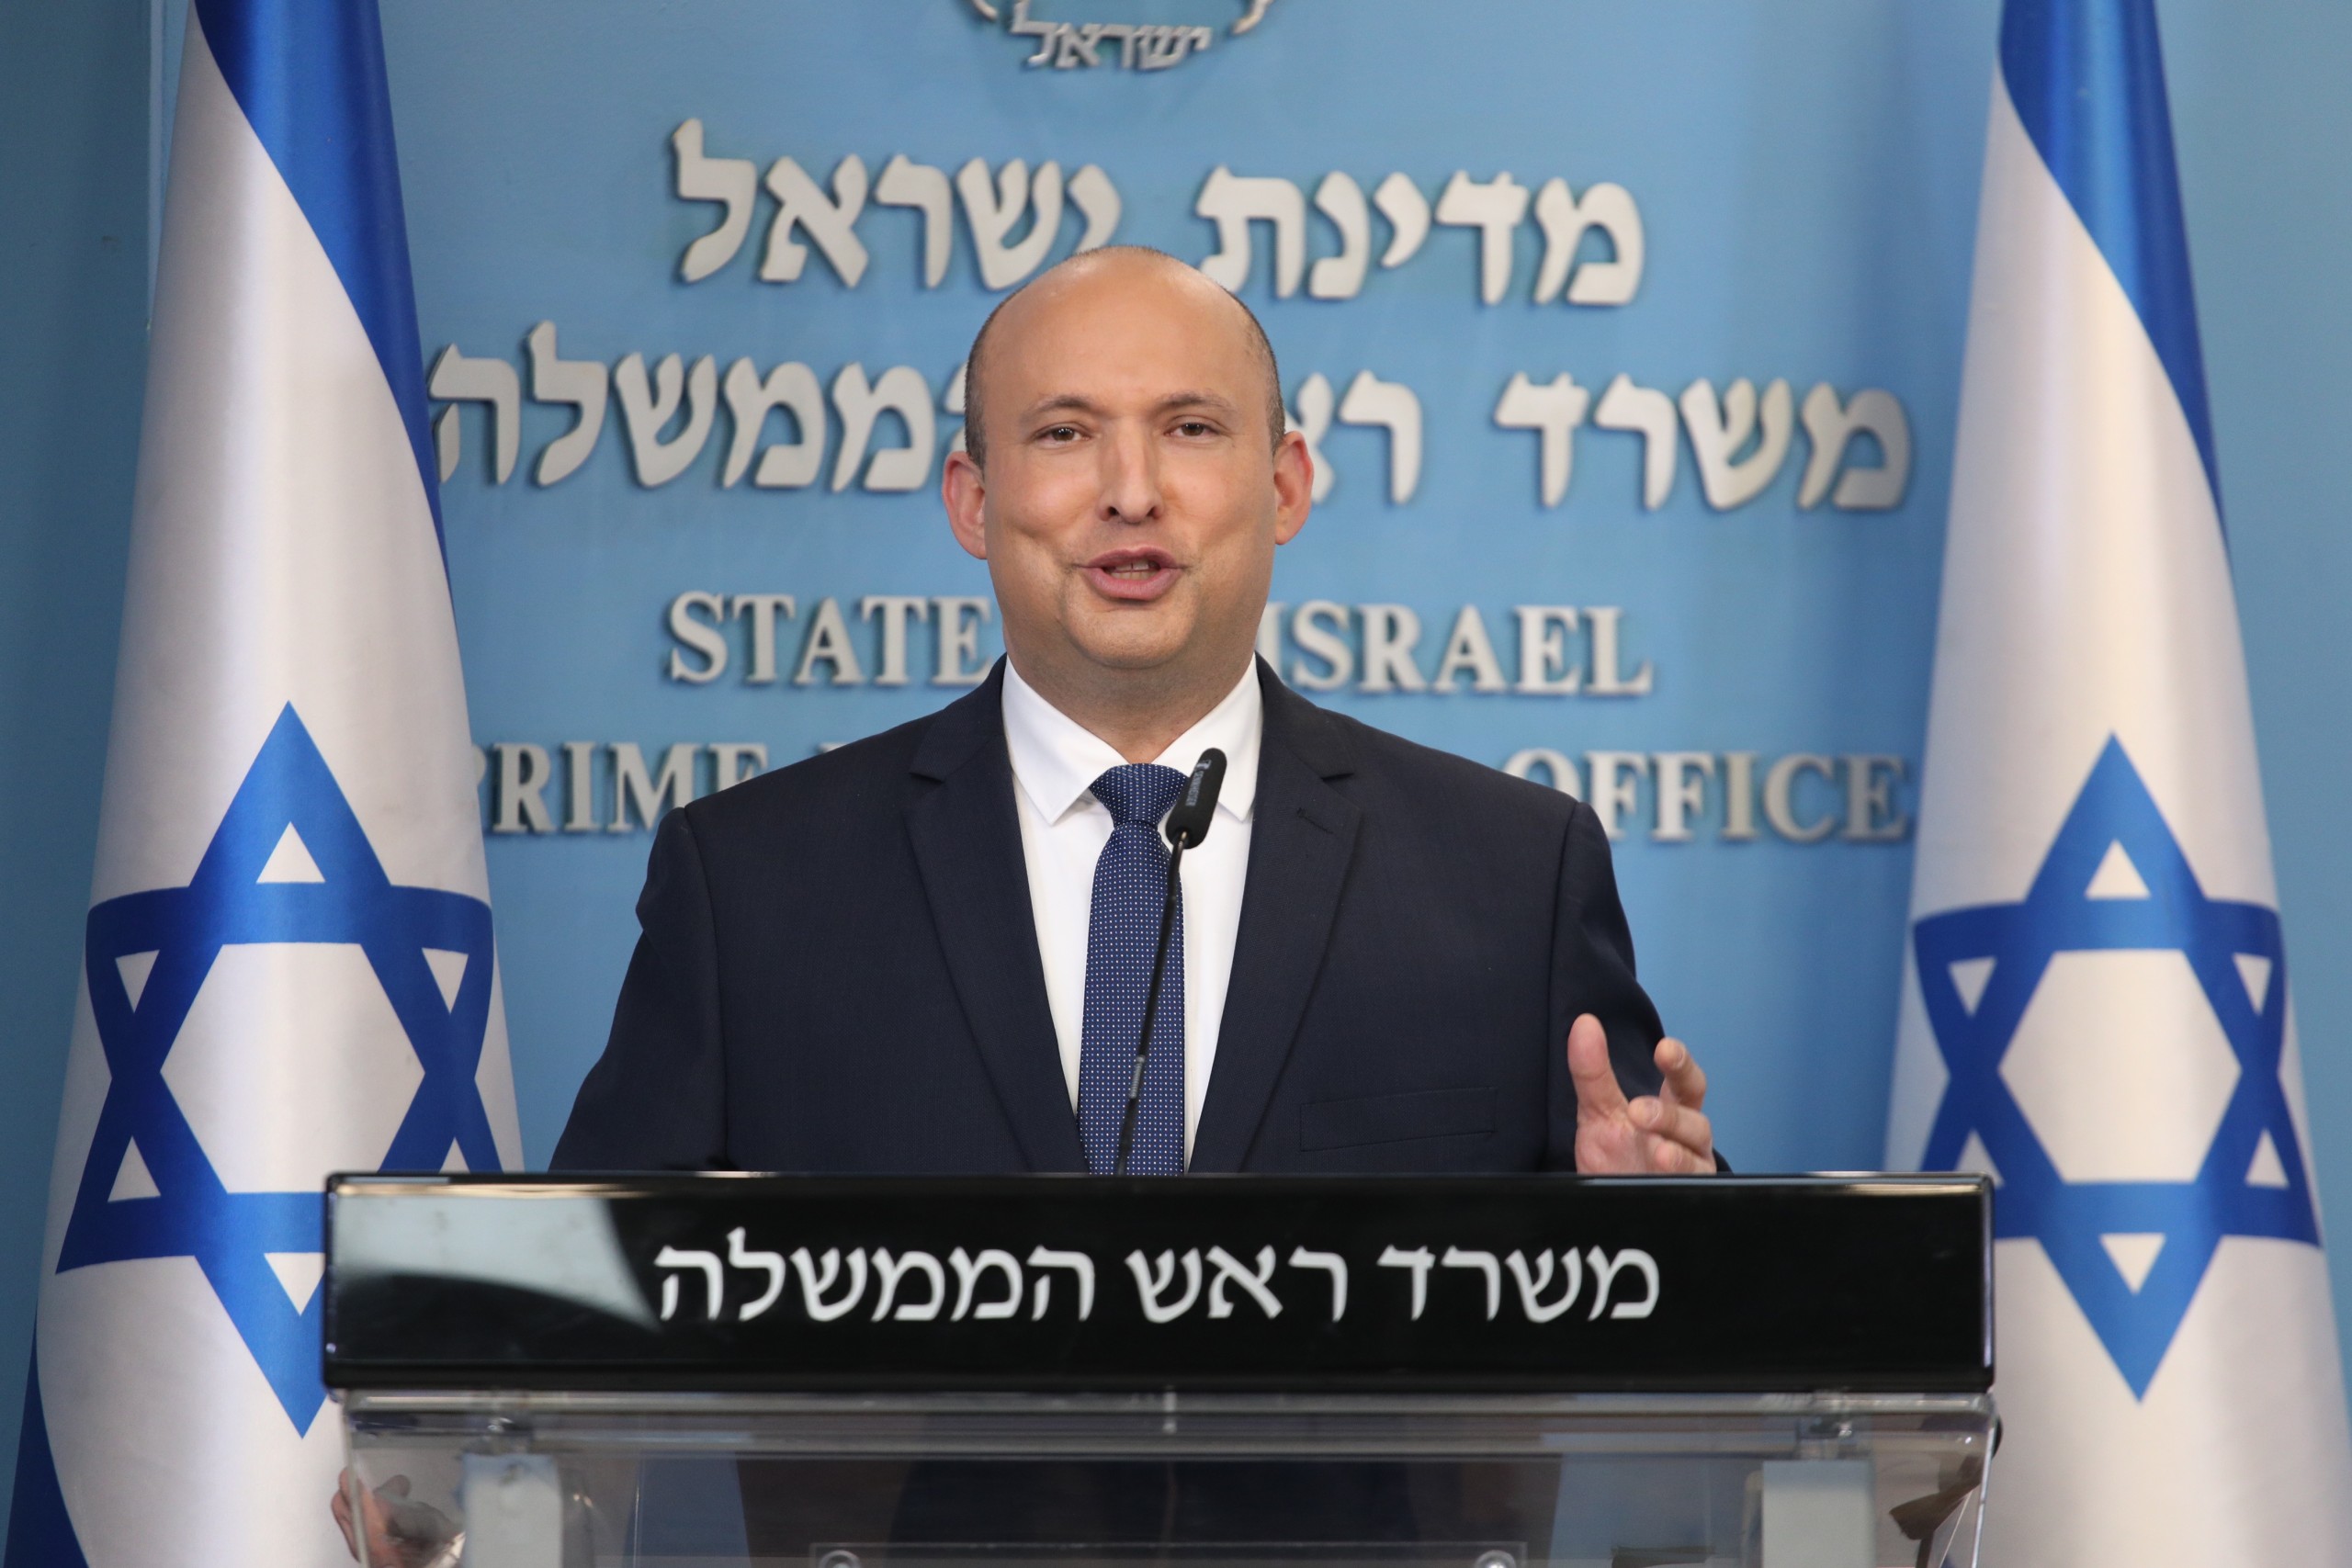 epa09663856 Israeli Prime Minister Naftali Bennett speaks during a press conference at the Prime Minister's Office in Jerusalem, Israel, 02 January 2022. Israeli Prime Minister Bennett announced that the Health Ministry has approved Israelis over the age of 60 and medical workers to receive a fourth dose of the vaccine against COVID-19.  EPA/Emil Salman / POOL